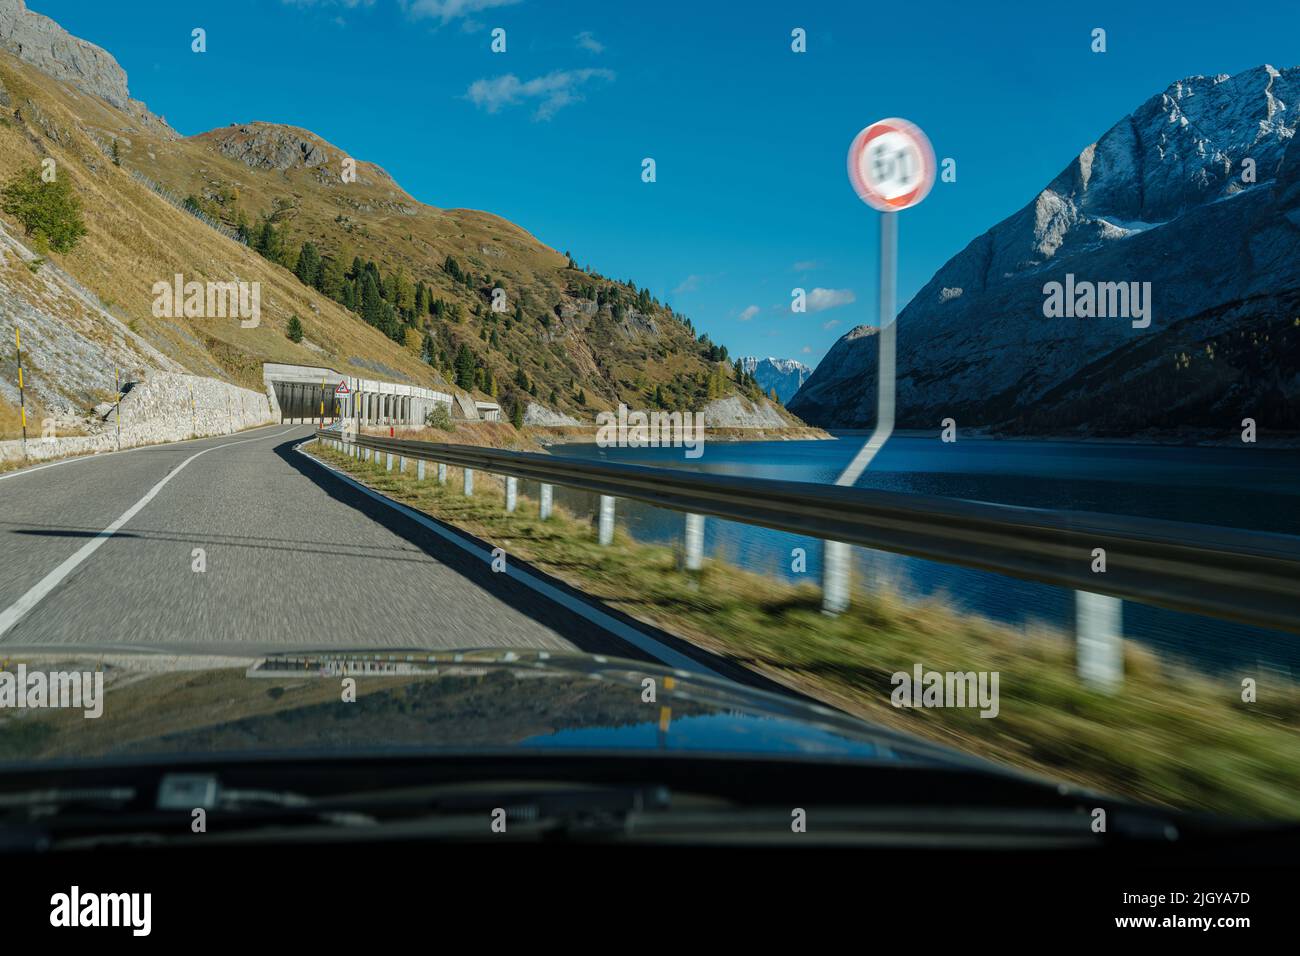 Car moving fast with speed limit violation on a twisty road with a rocky landscape. View from the interior of a vehicle. Dangerous driving concept. Stock Photo